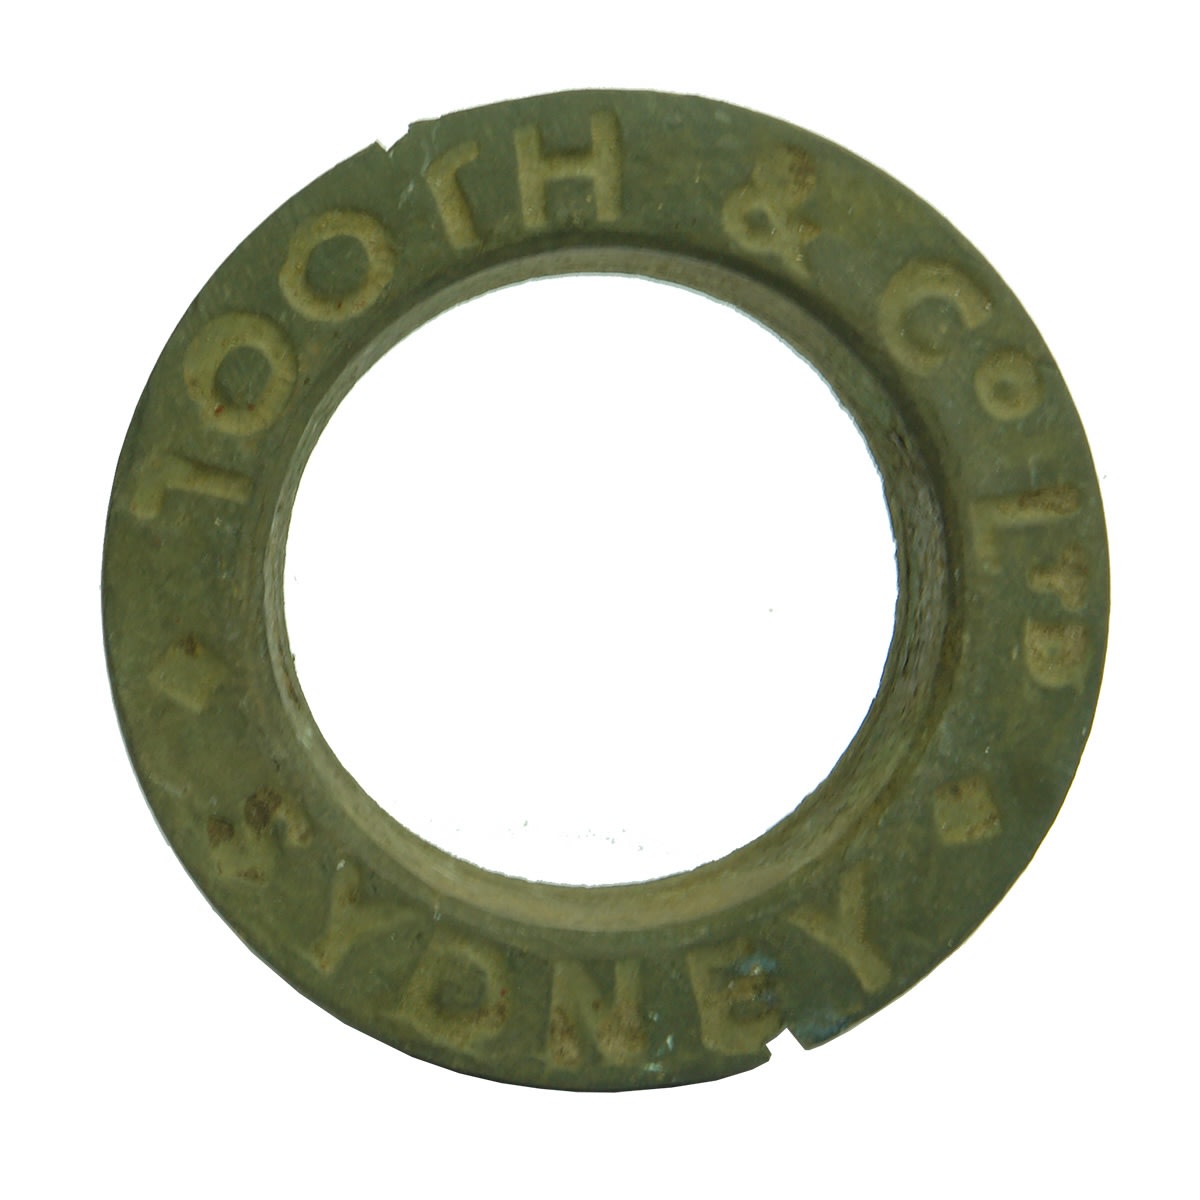 Beer Barrel Bung. Tooth & Co Ltd, Sydney. (New South Wales)